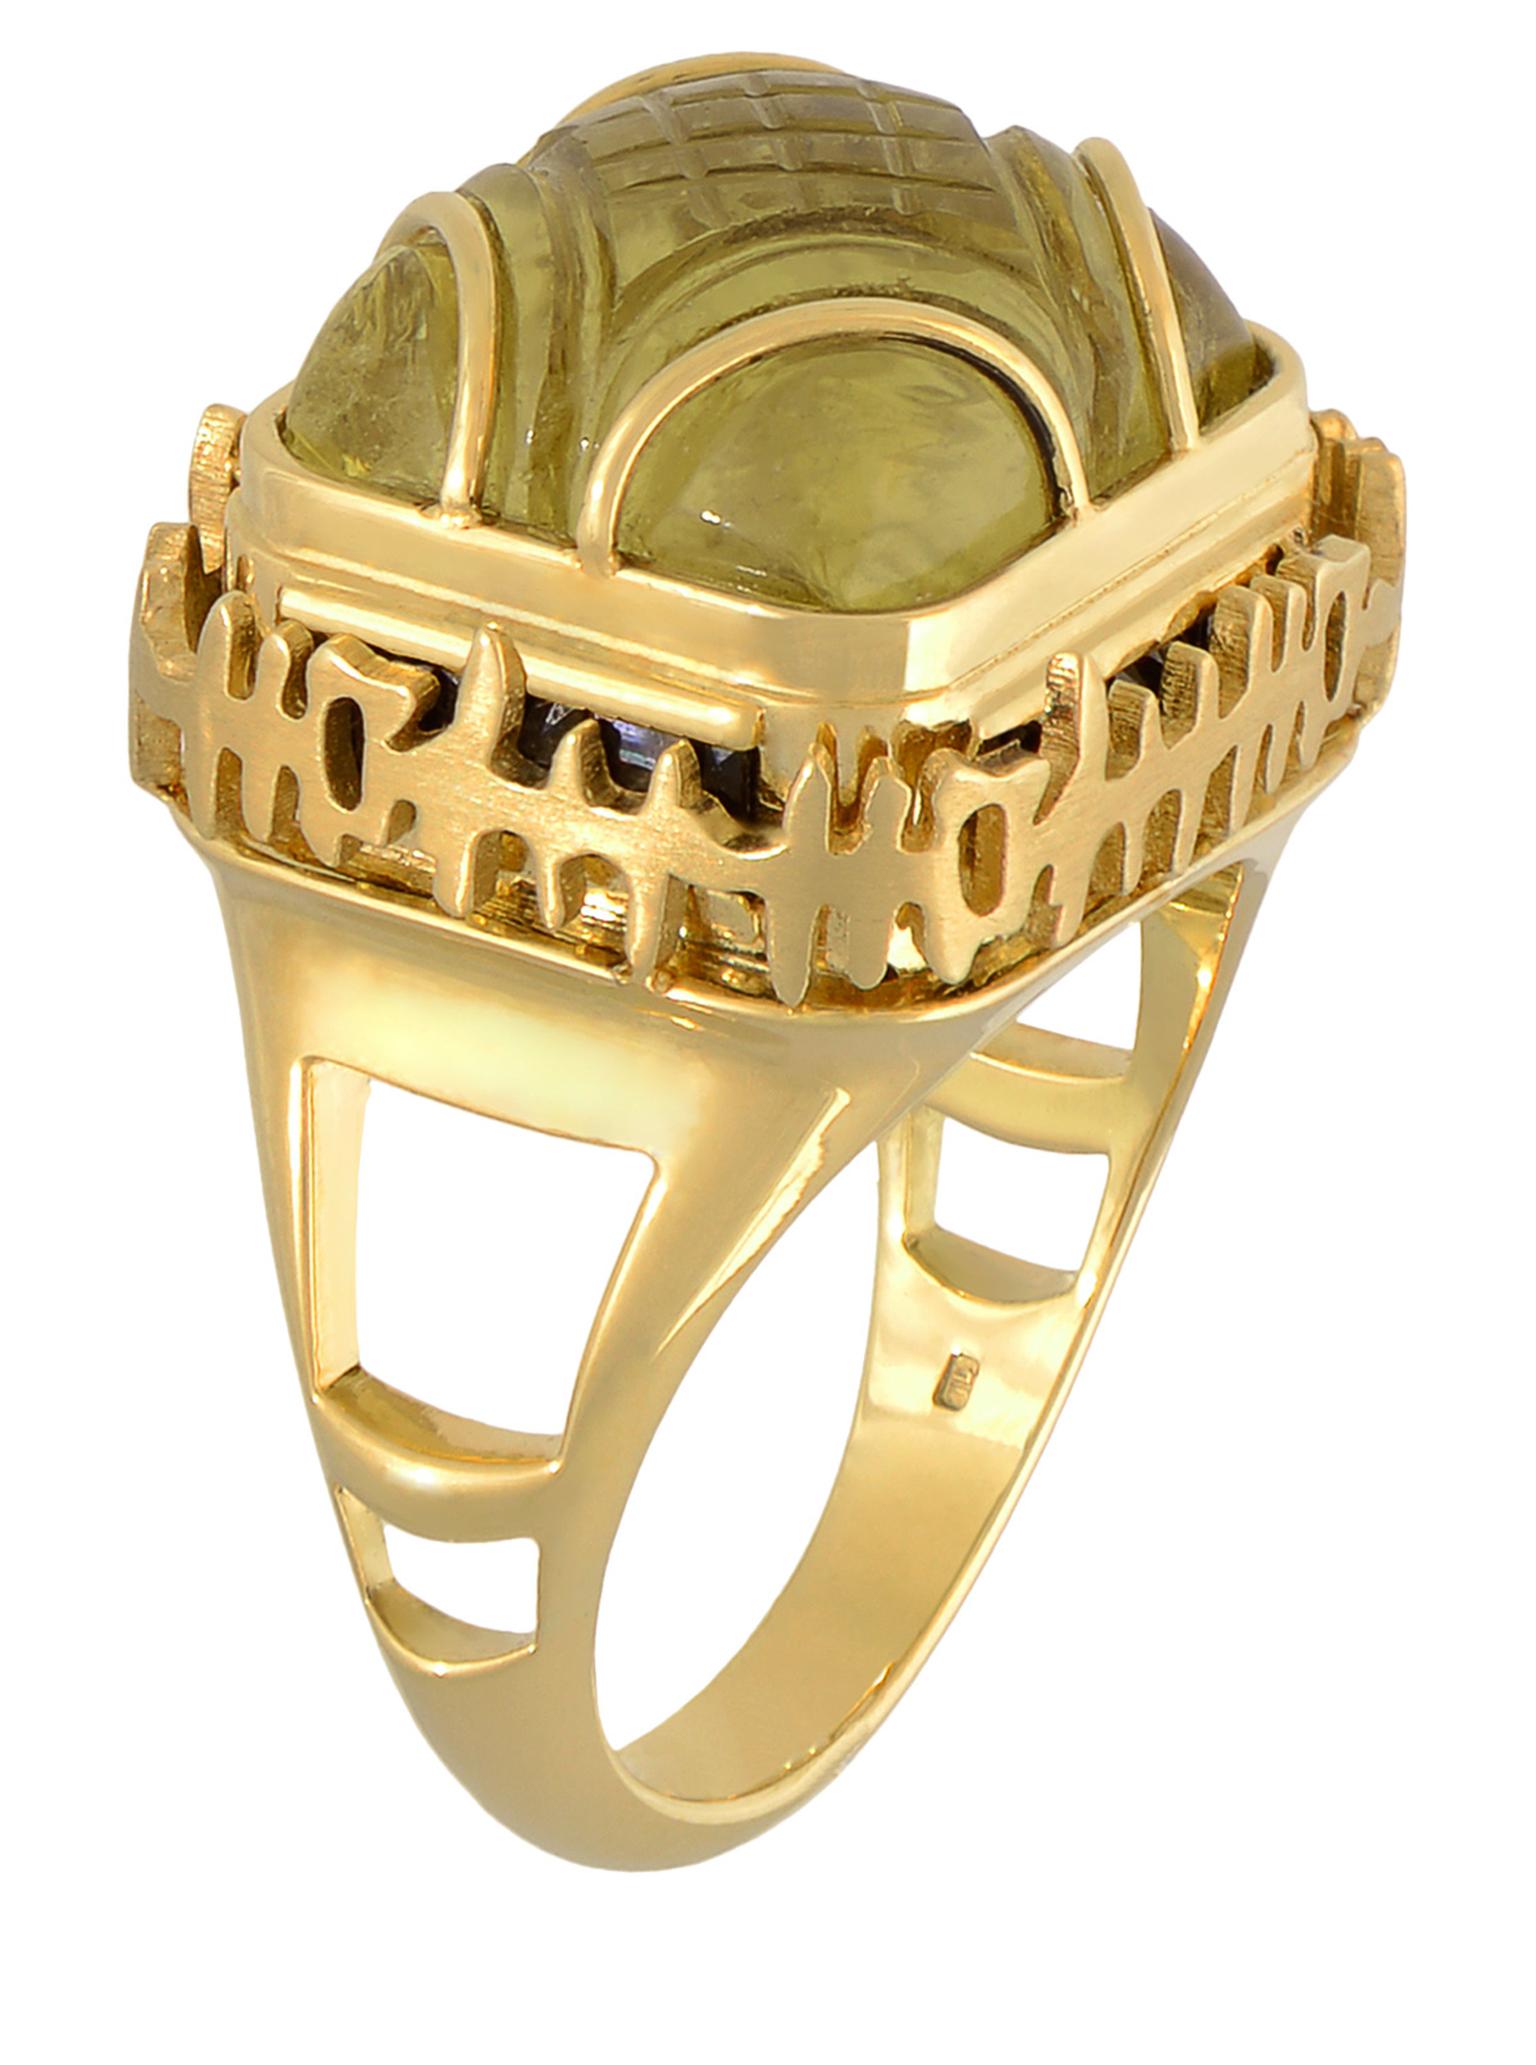 Tessa_Packard_Gold_Calligraphy_Ring_20140117_Zoom